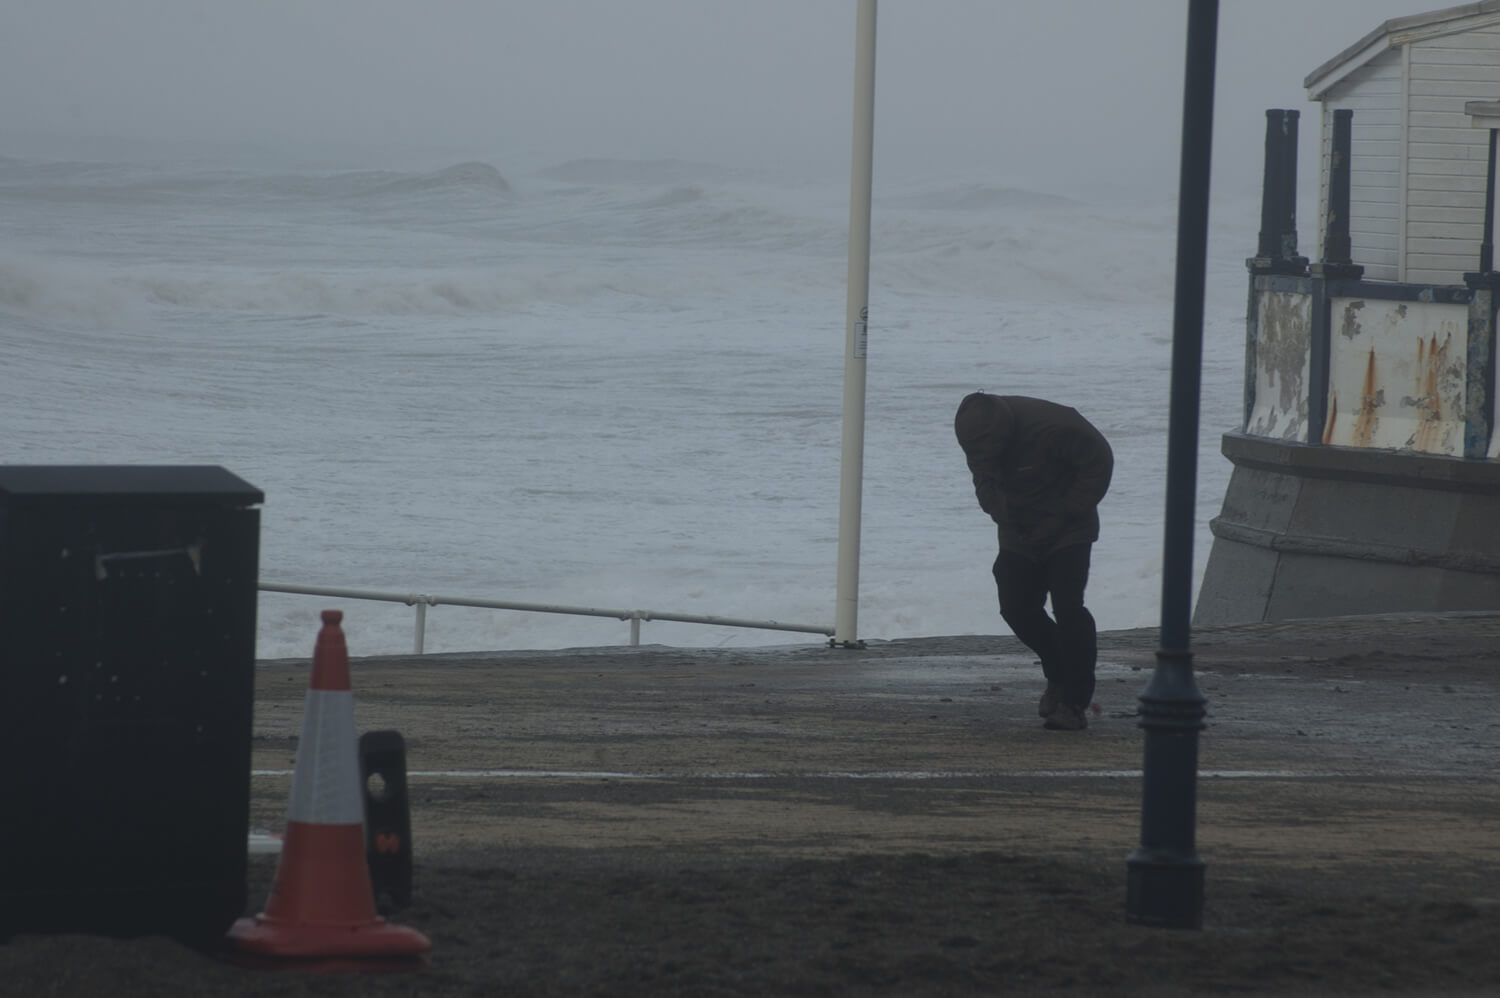 CE Aberystwyth storms man on the promenade battling the high winds